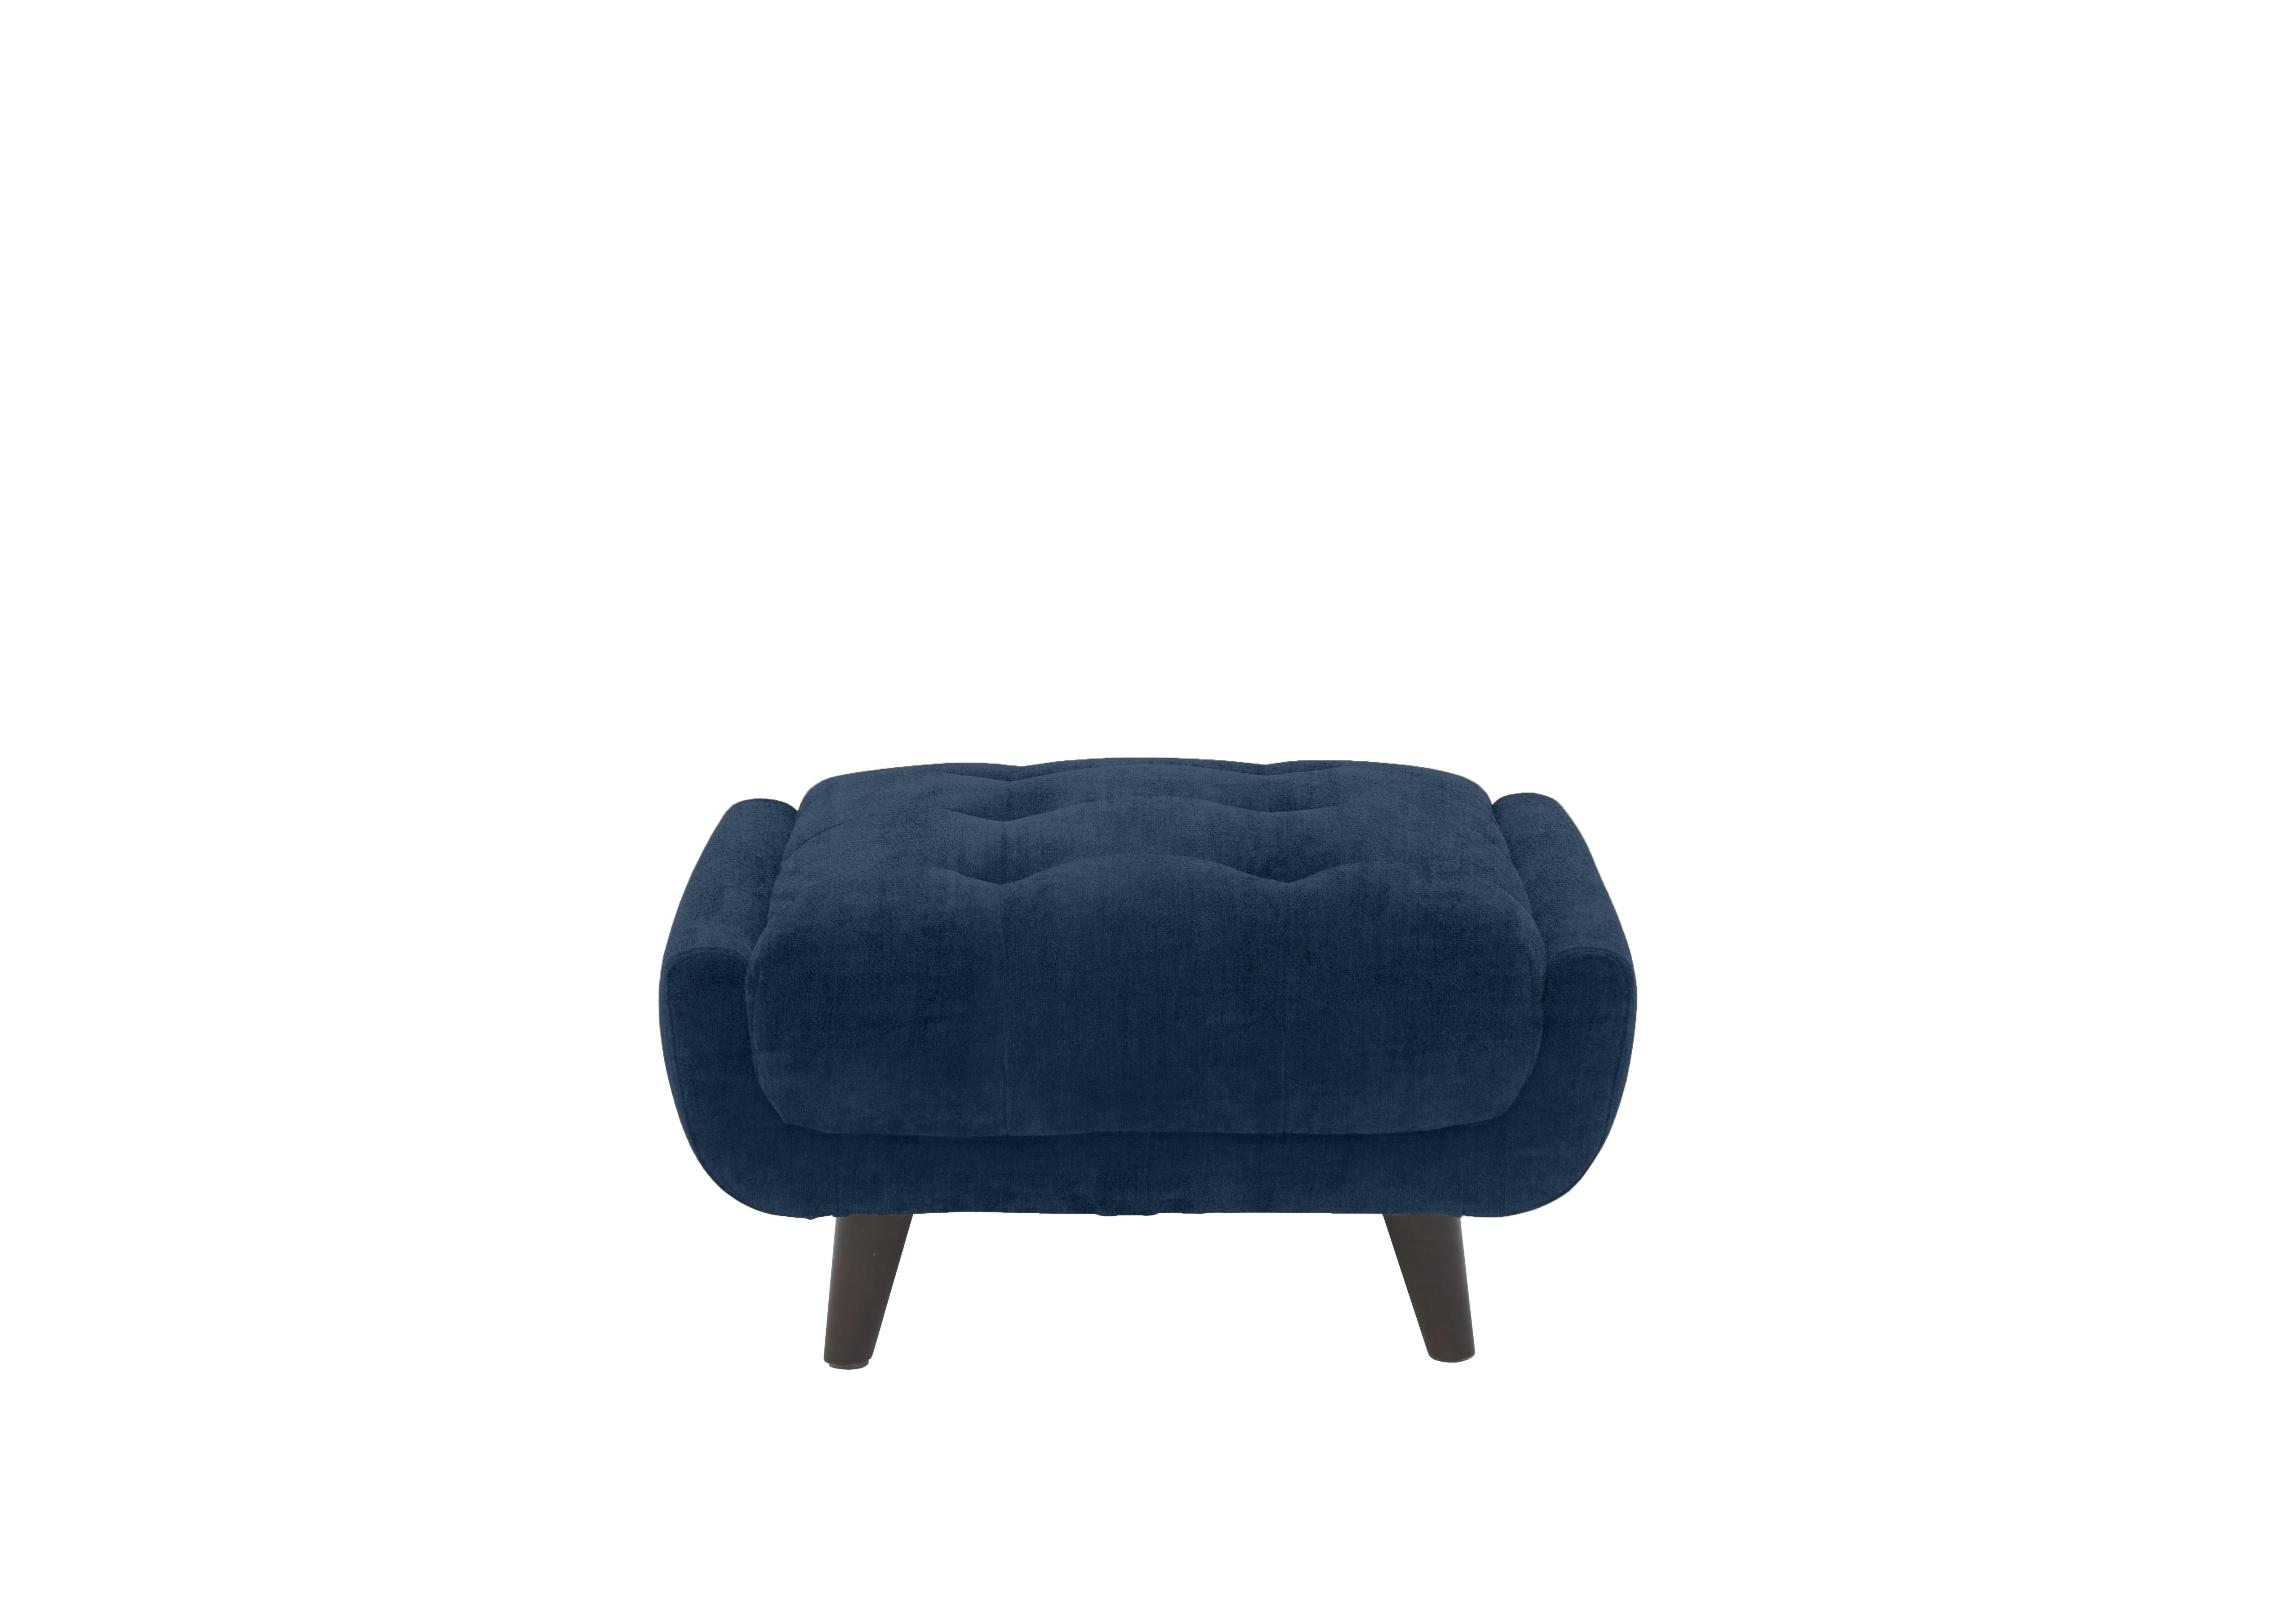 Rene Small Fabric Footstool in Heritage 52000 Airforce Es Ft on Furniture Village